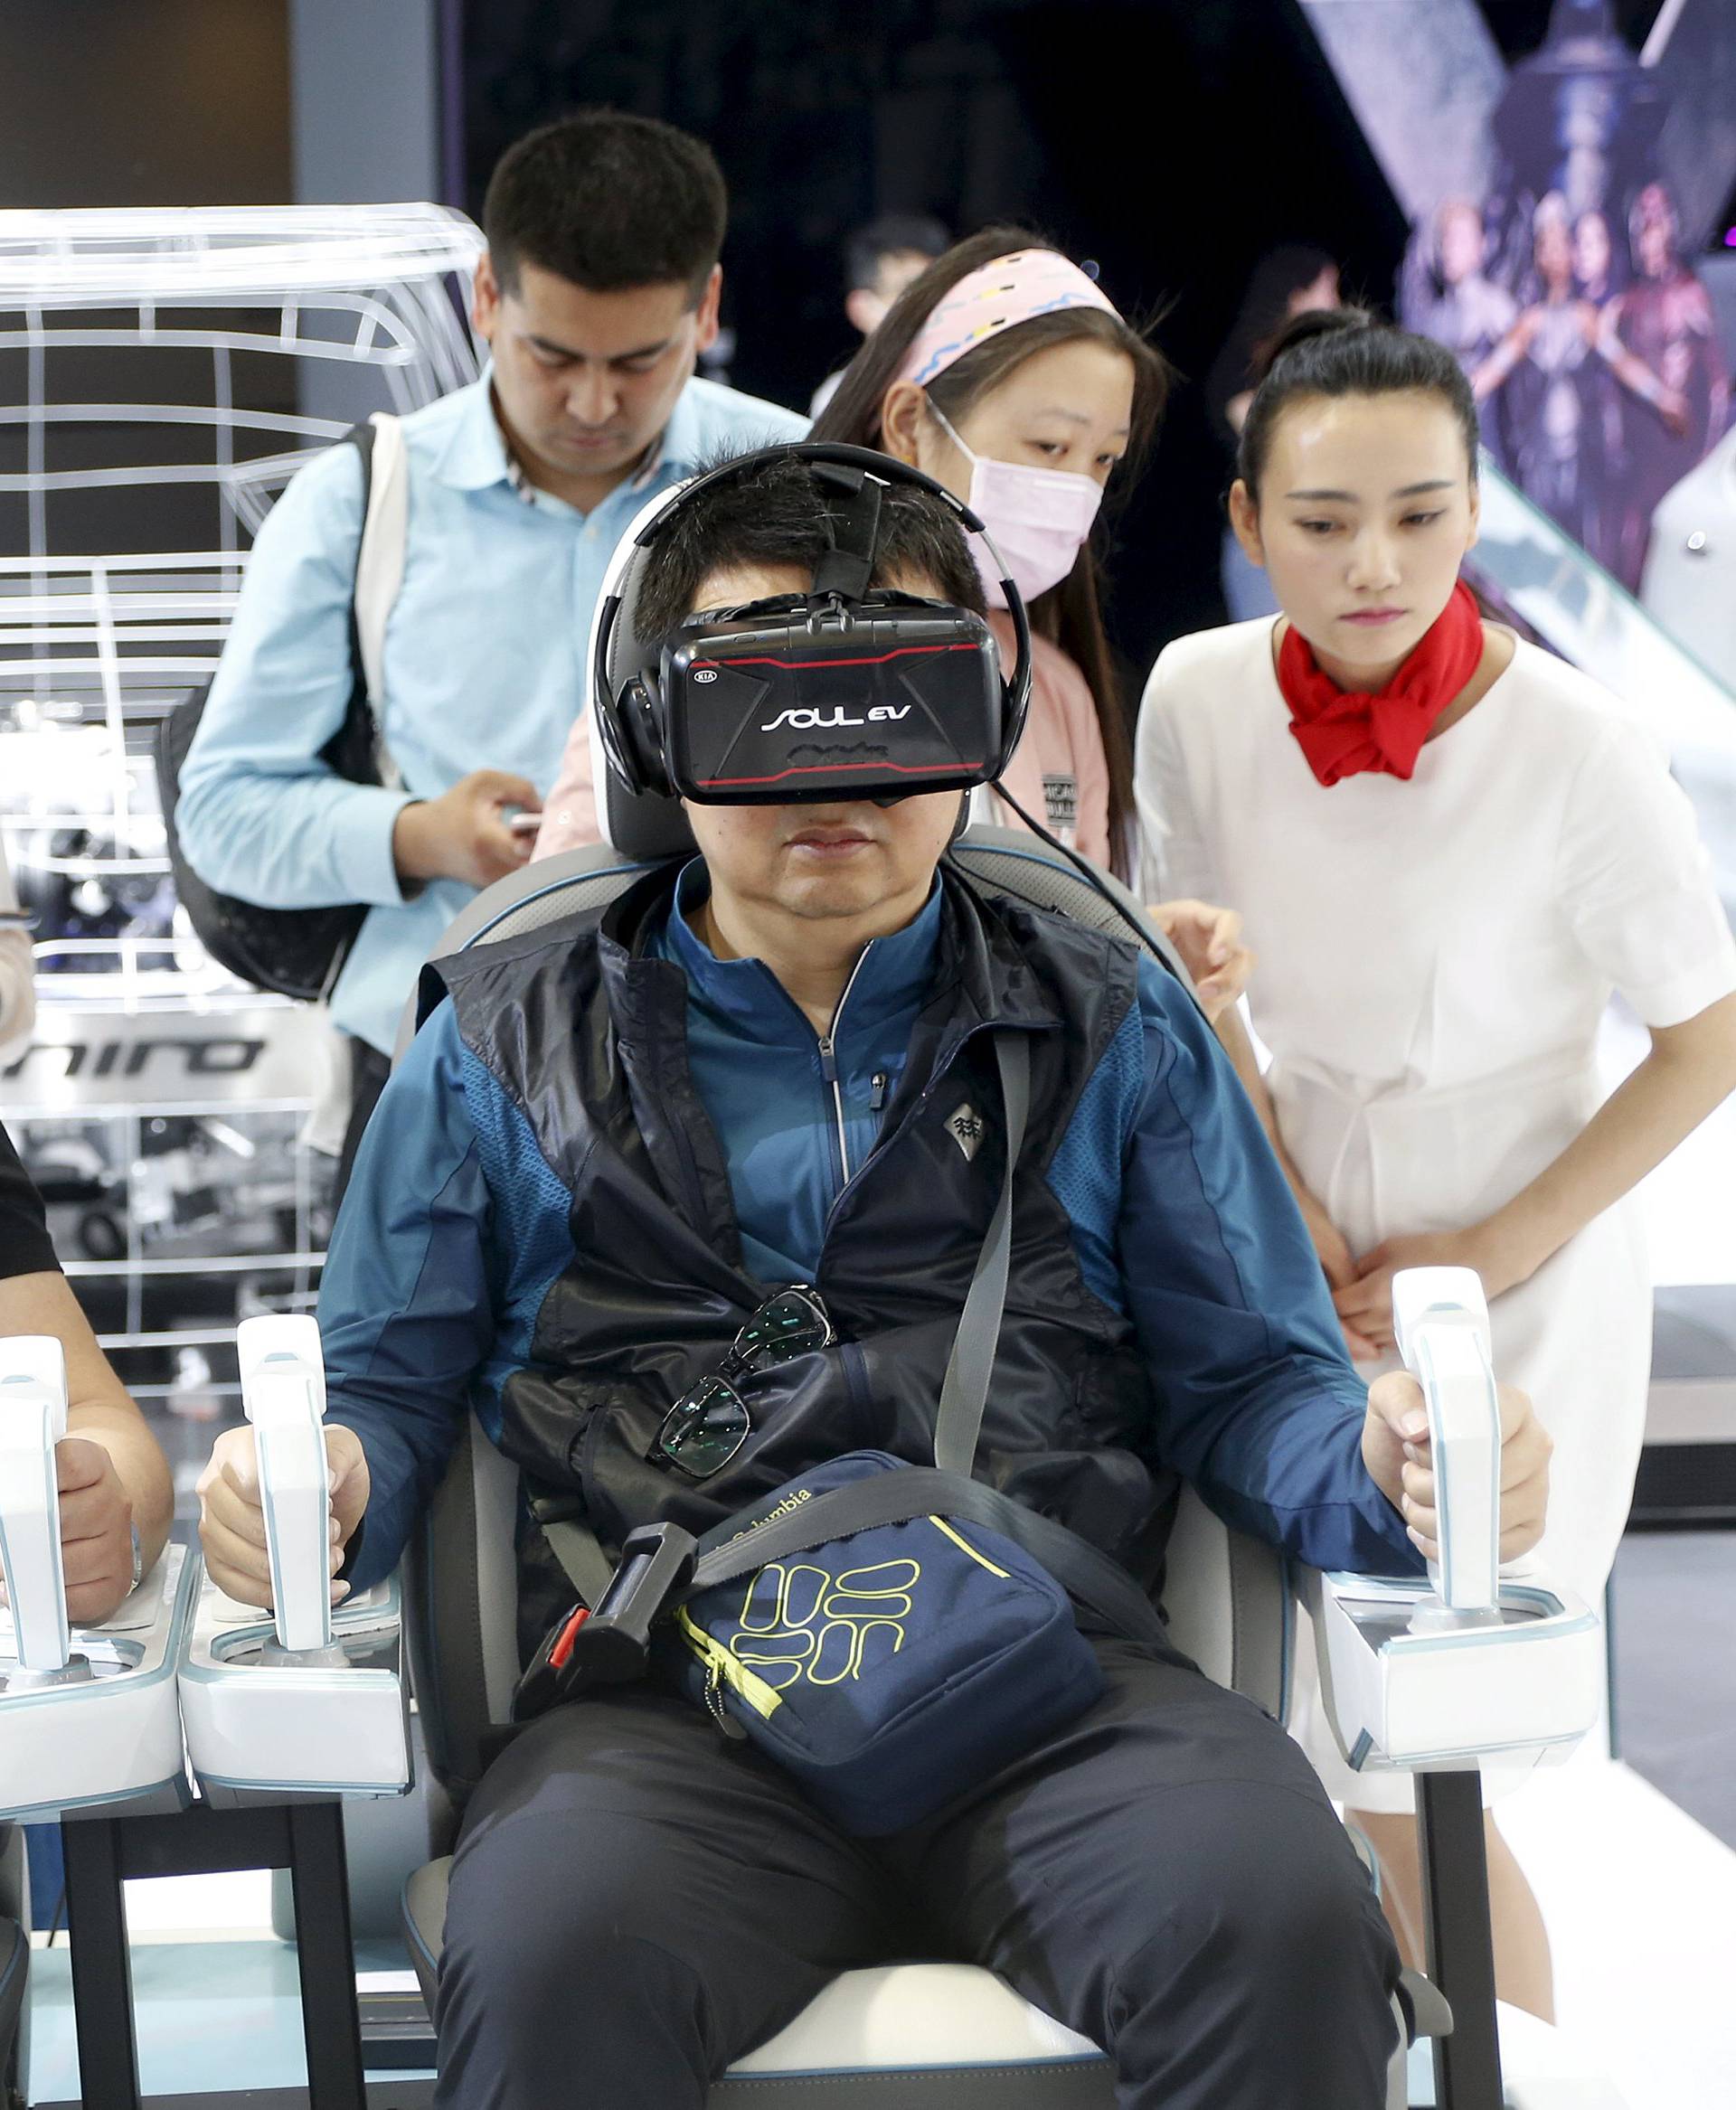 Visitor use VR experience technology at the booth of Kia Motors during the Auto China 2016 auto show in Beijing